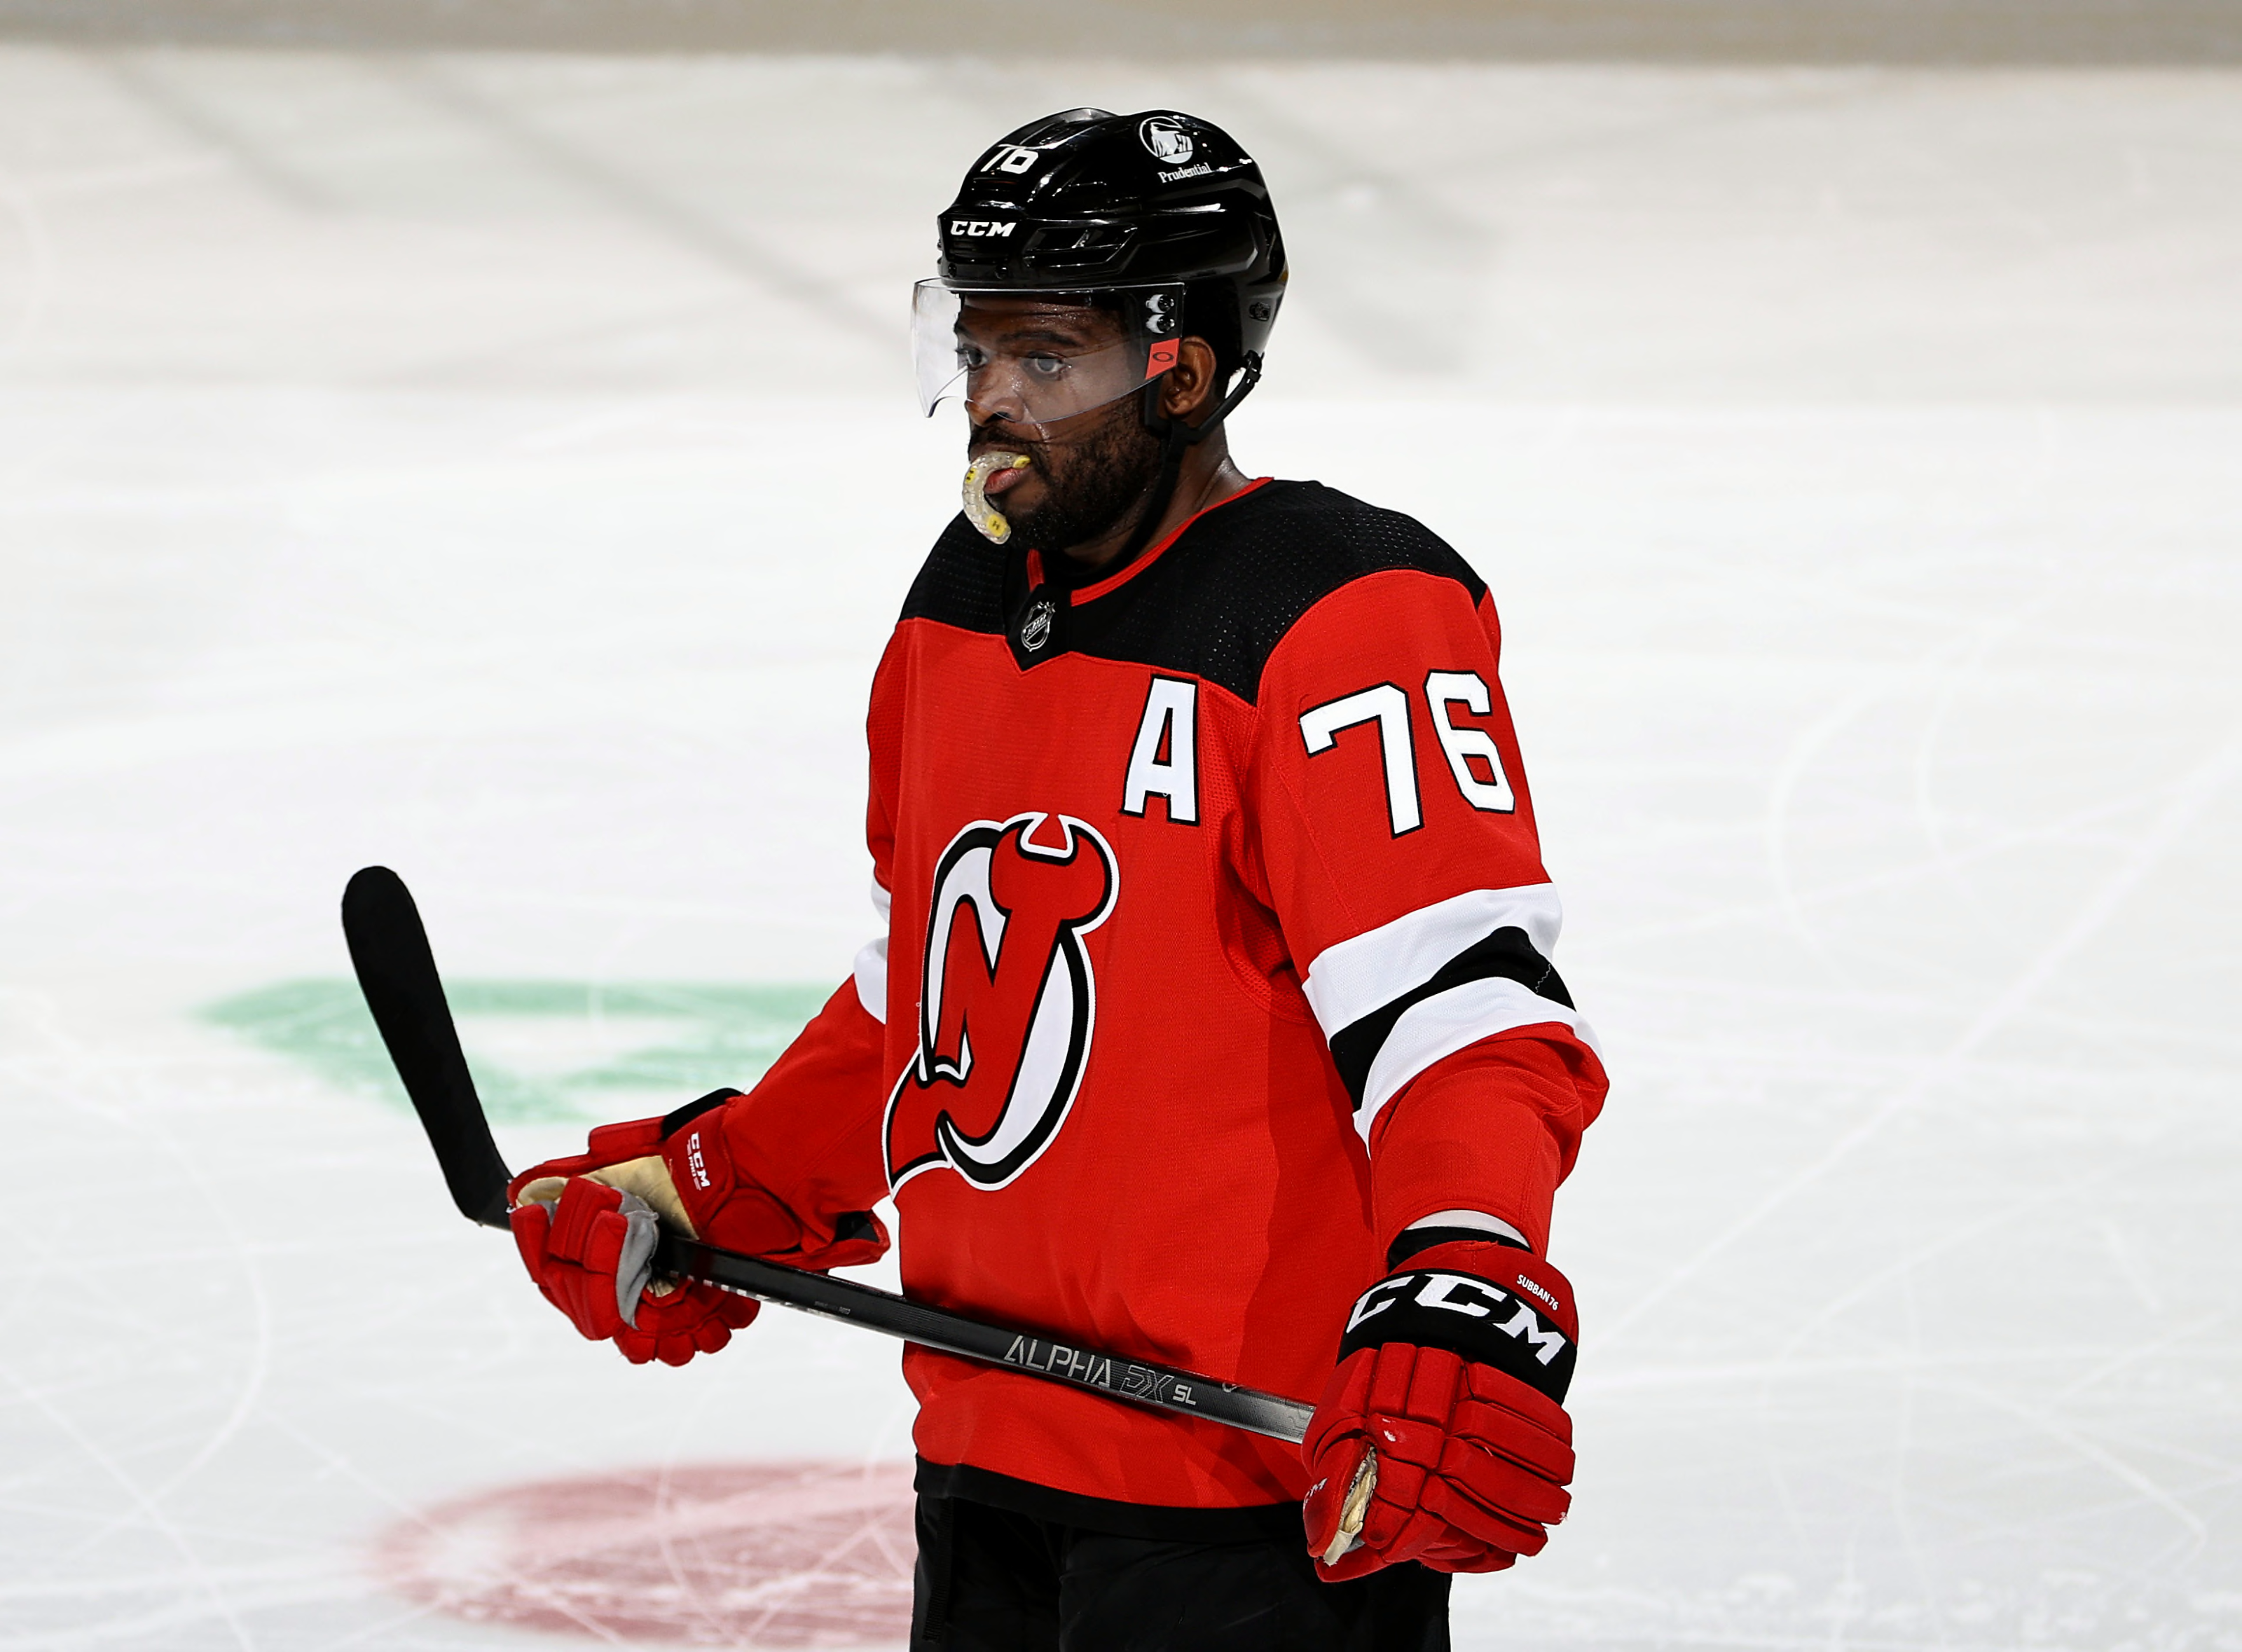 Why no World Cup of Hockey love for P.K. Subban from Hockey Canada?